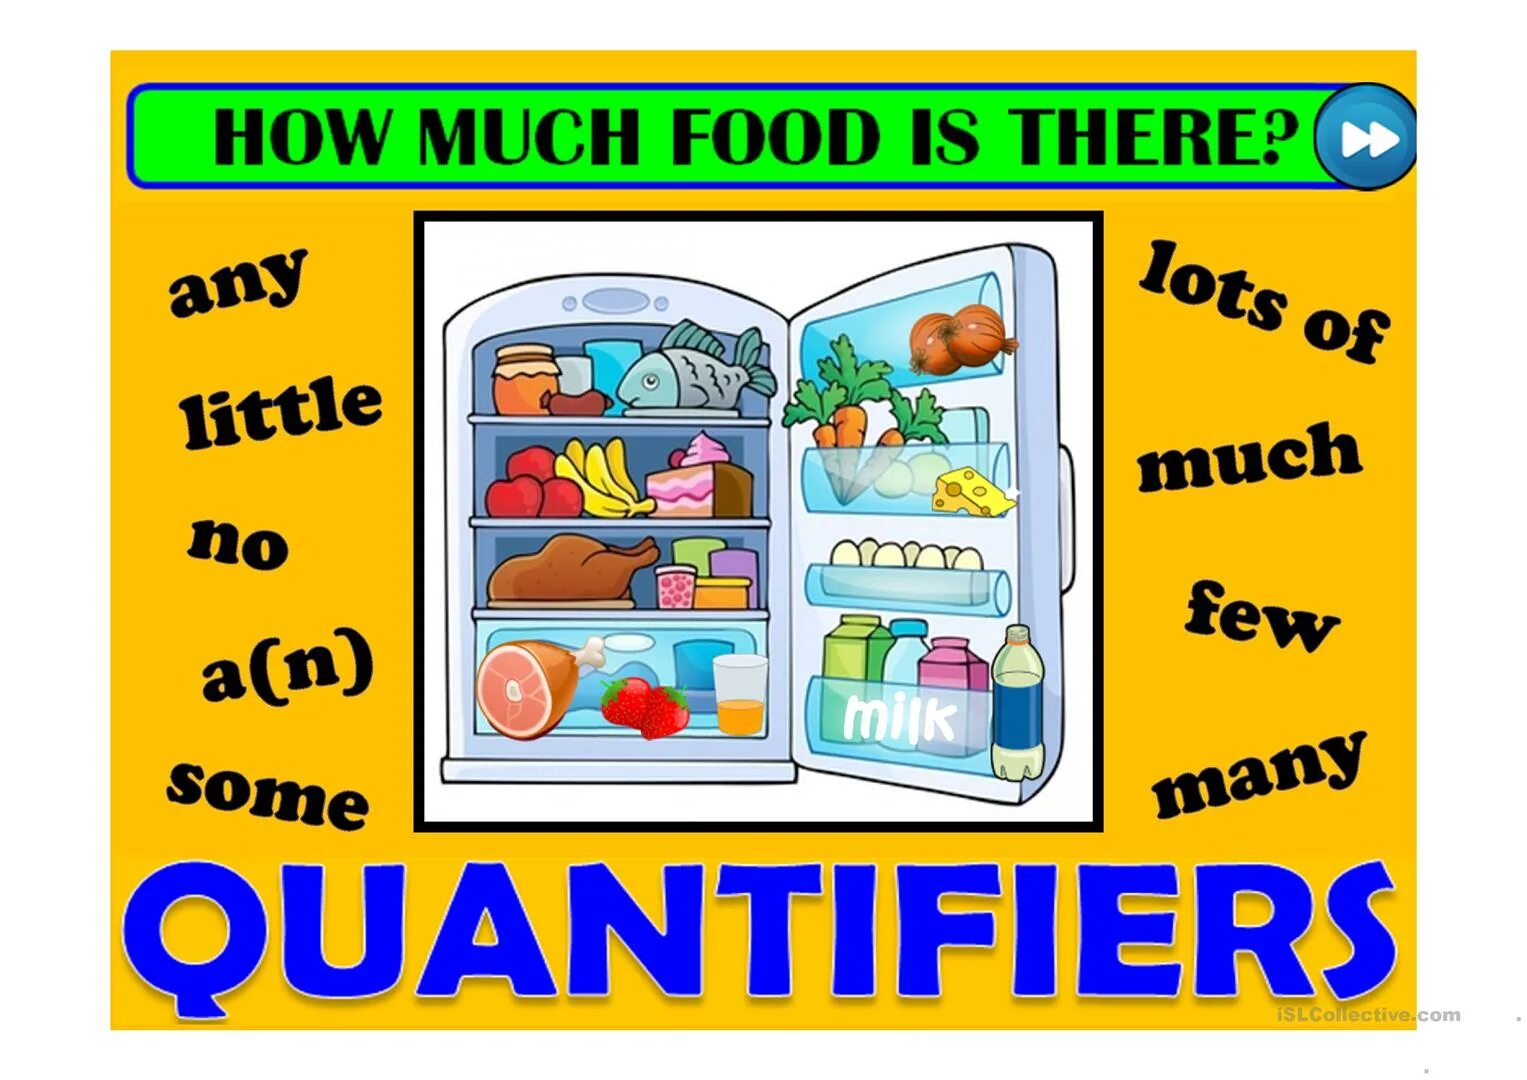 Much many тема food. How many how much игра. Игра quantifiers. Much many картинки. A lot of blank